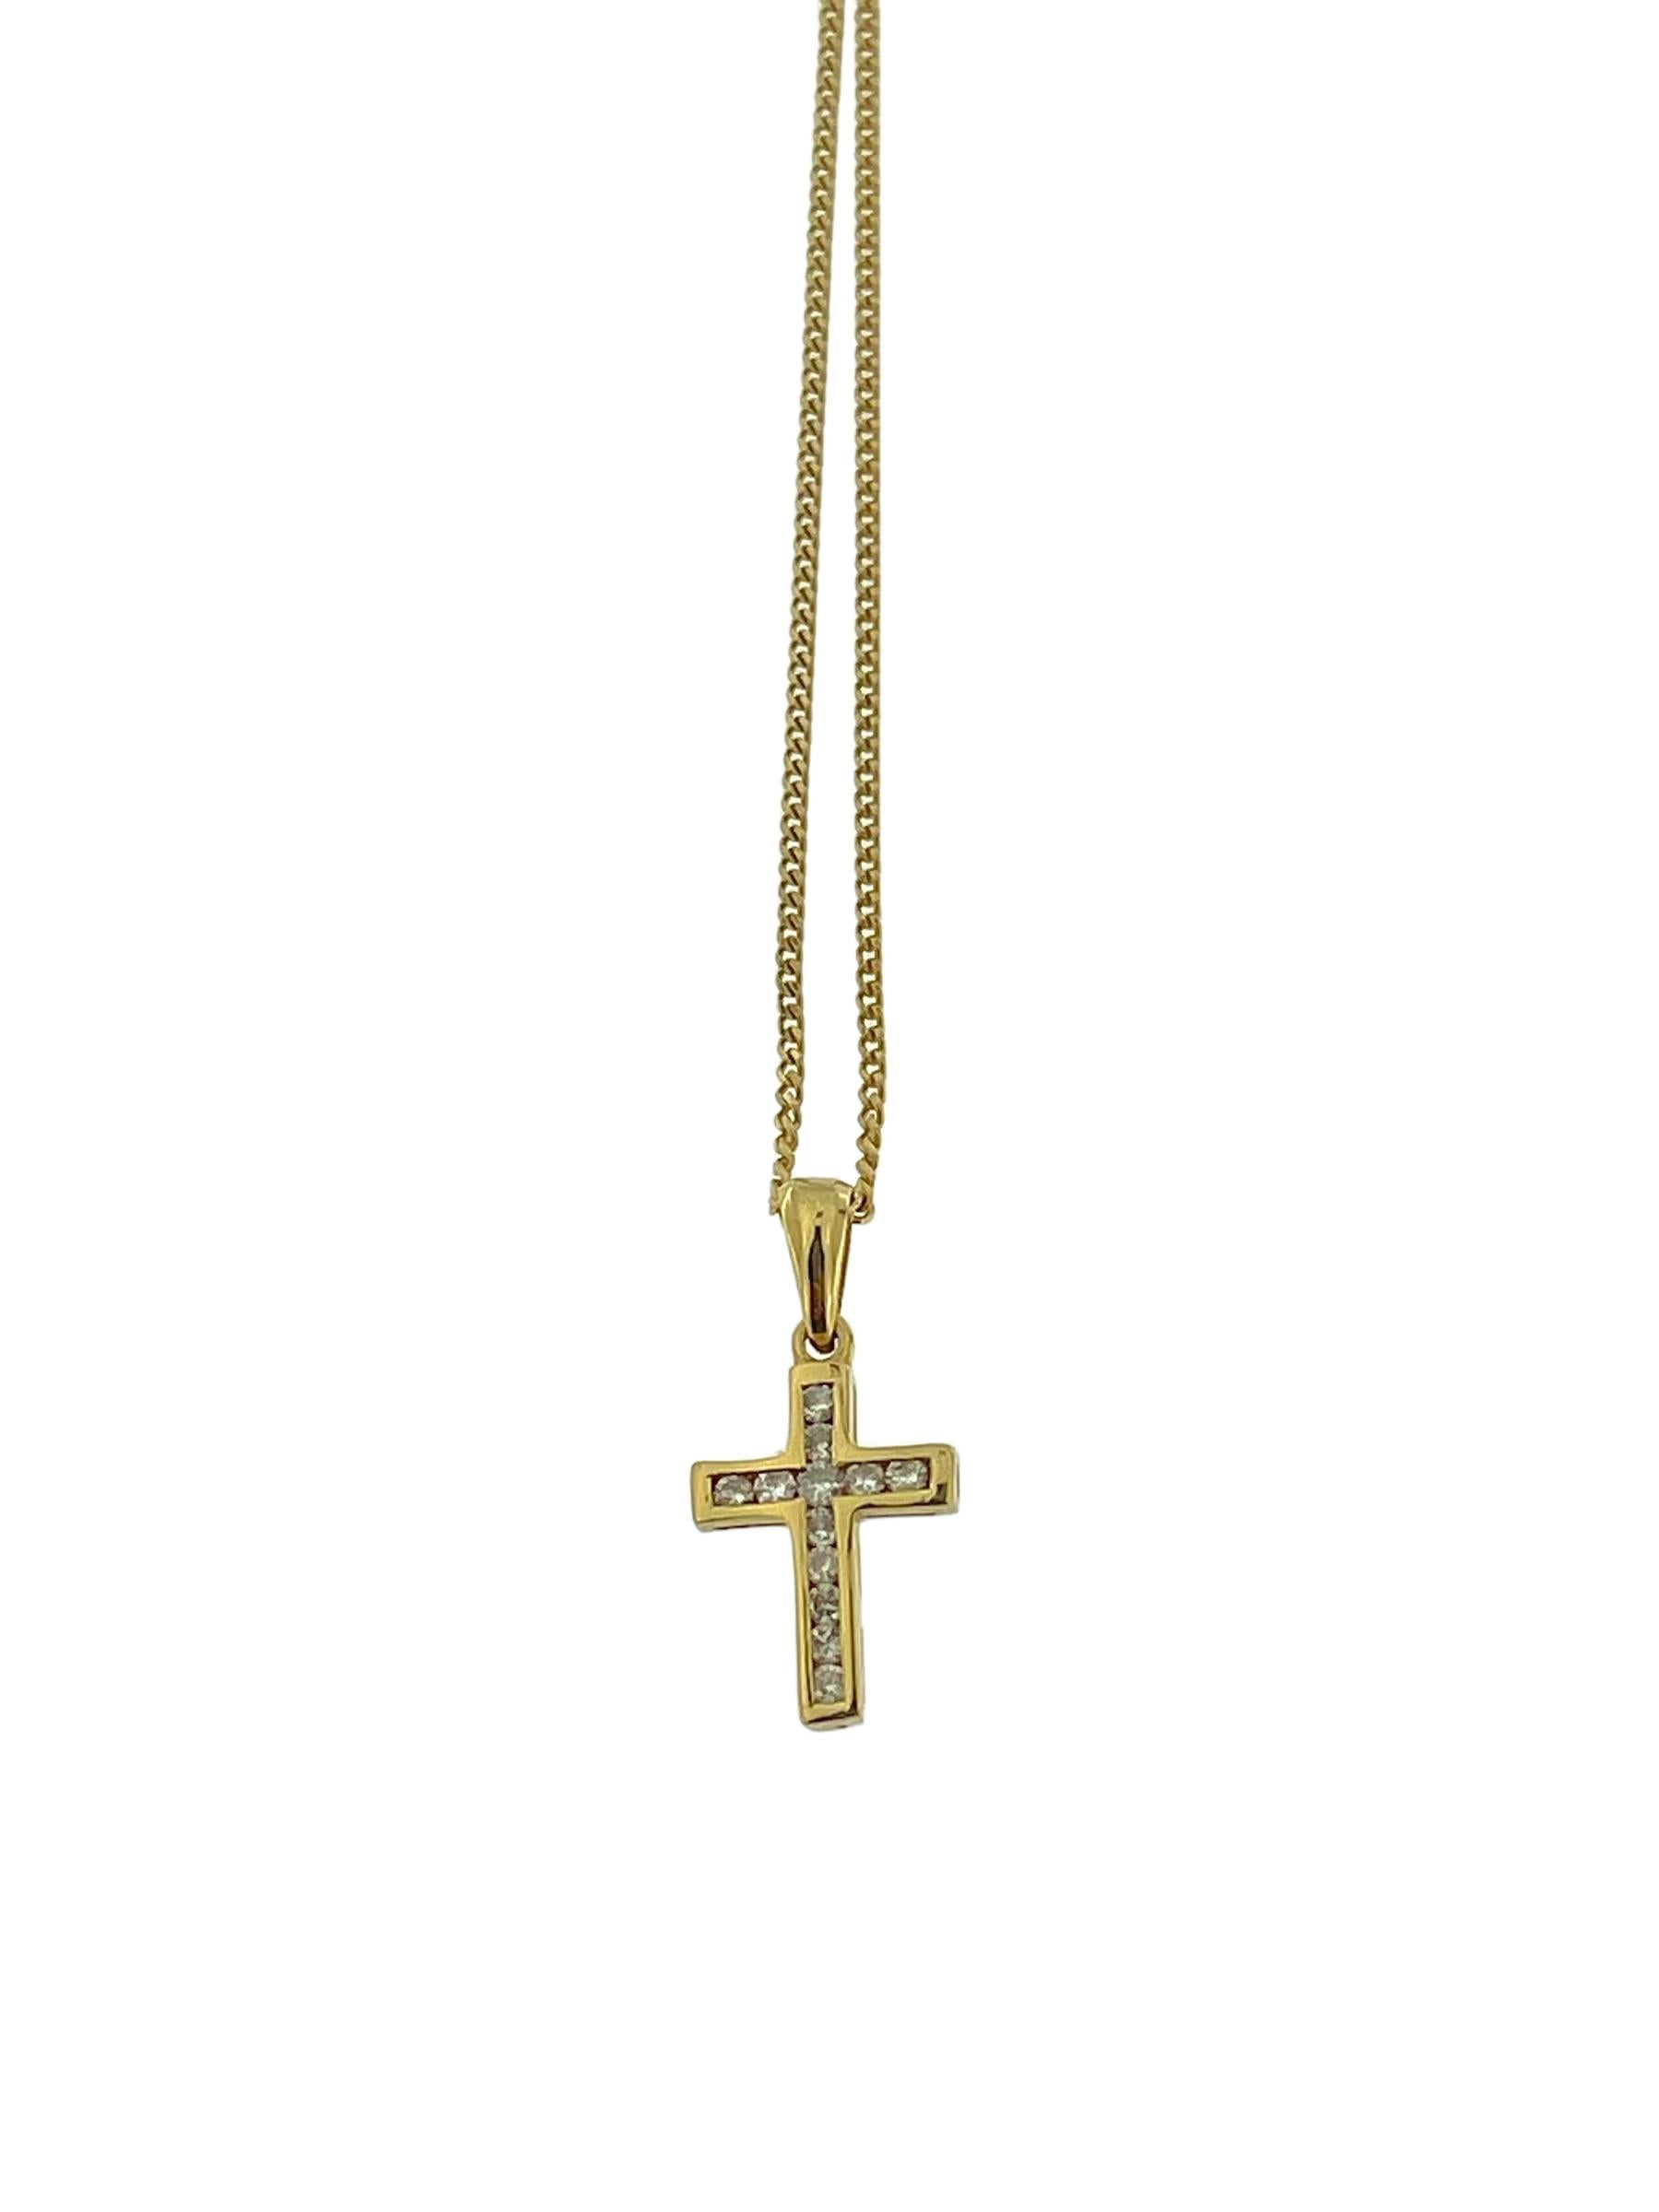 The Yellow Gold Cross with Diamonds and Chain is a stunning symbol of faith and elegance. Crafted from 18-karat yellow gold, this cross pendant is adorned with dazzling diamonds channel-set, adding a touch of sparkle and sophistication to the